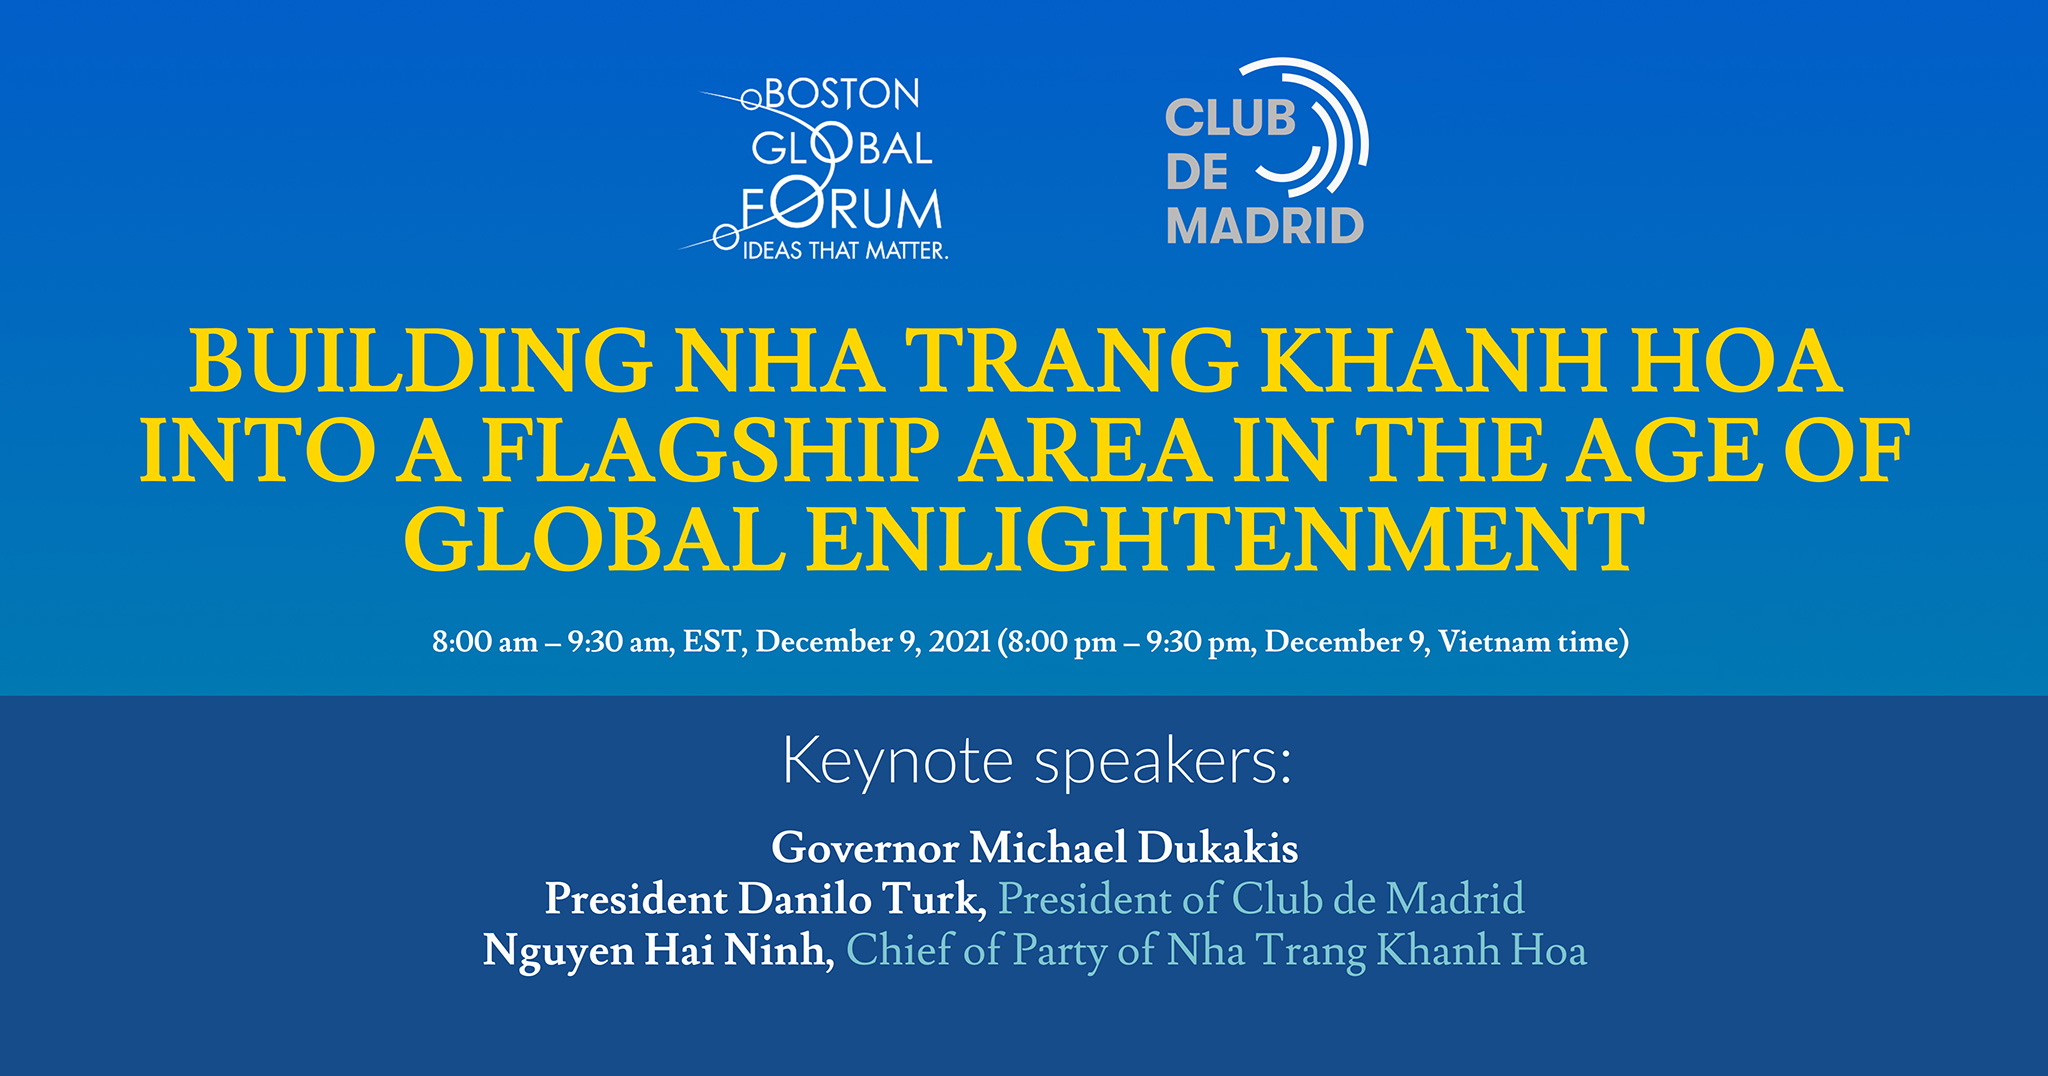 Building Nha Trang-Khanh Hoa in becoming an innovation center in the Age of Global Enlightenment, welcoming Club de Madrid Policy Dialog 2022 to Vietnam